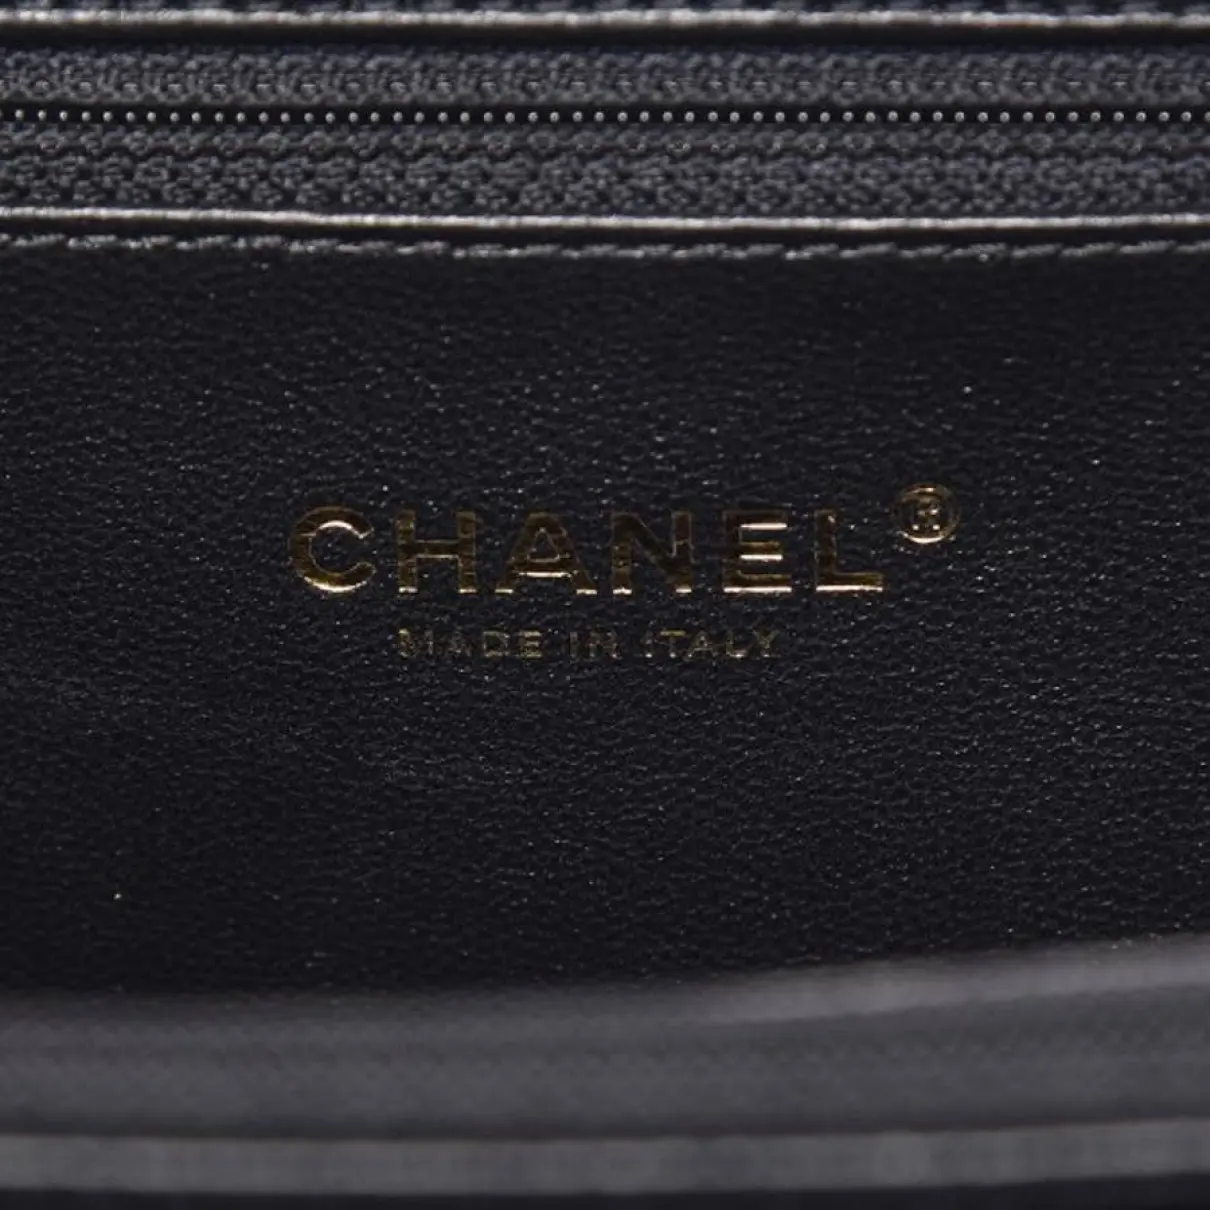 Vanity leather tote Chanel